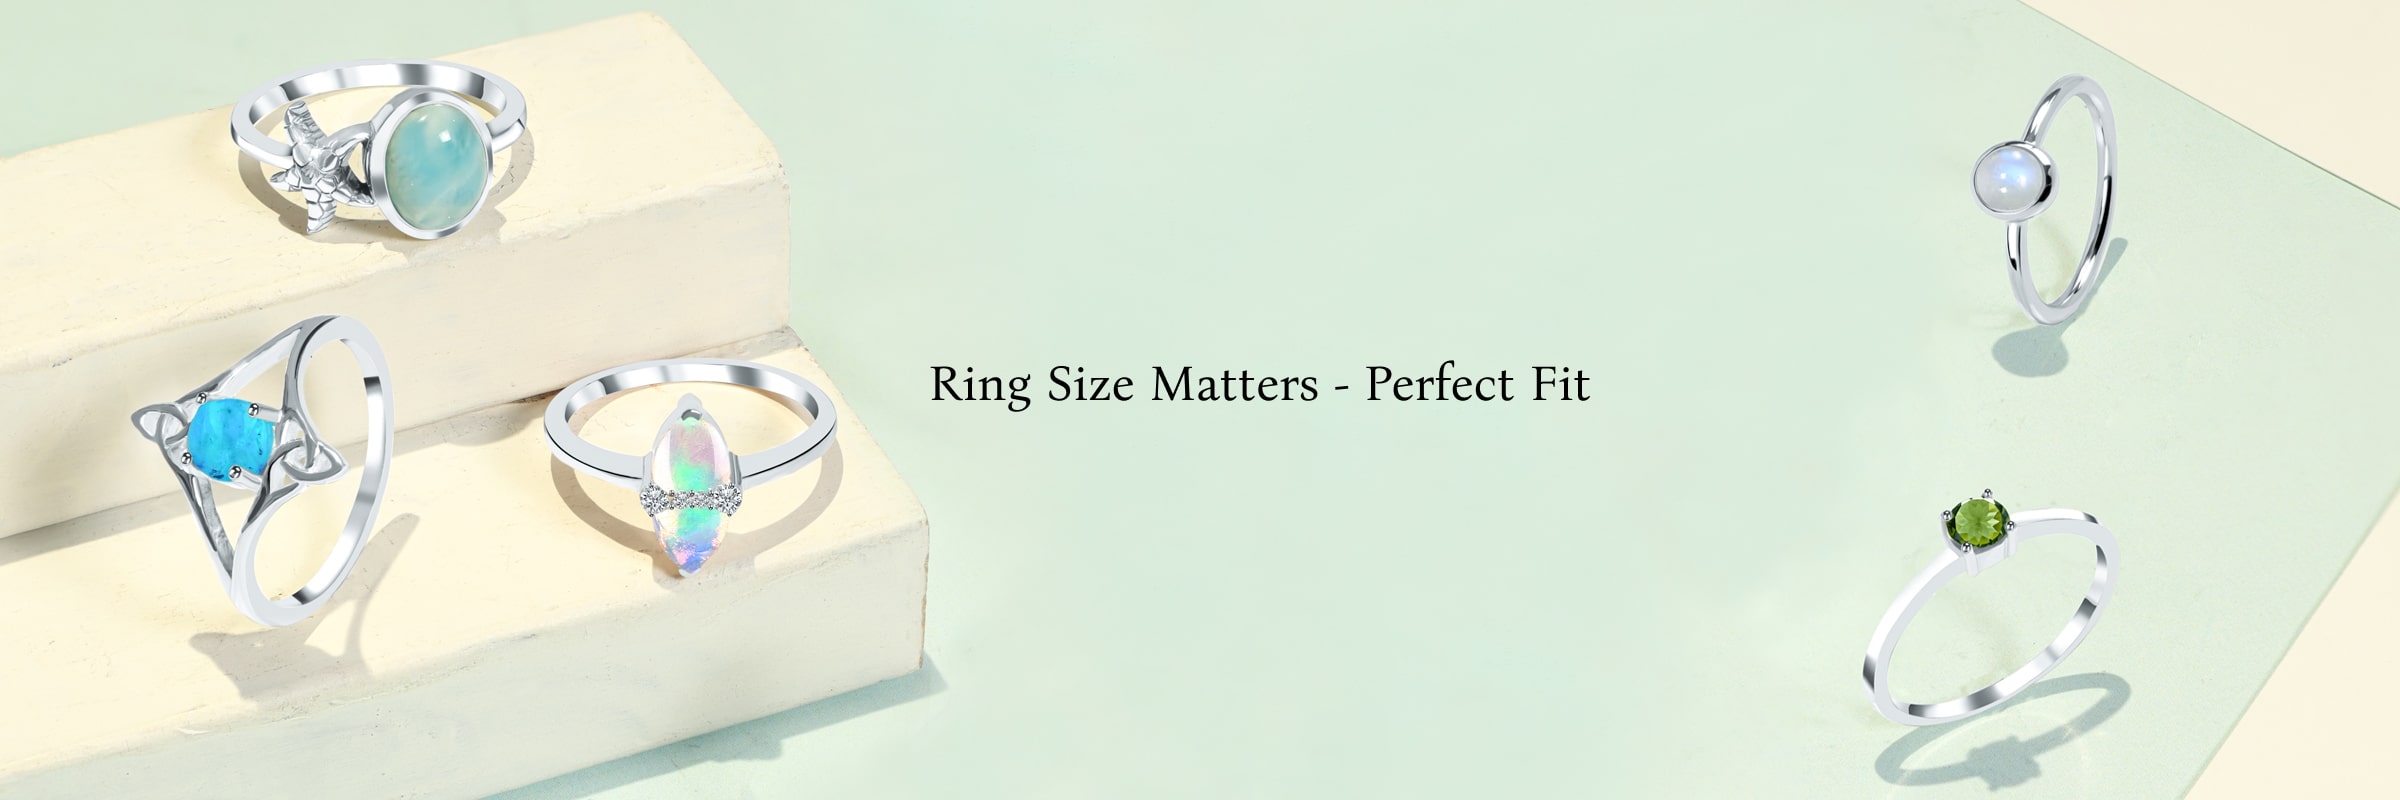 Ensuring the Right Fit: Ring Size Matters